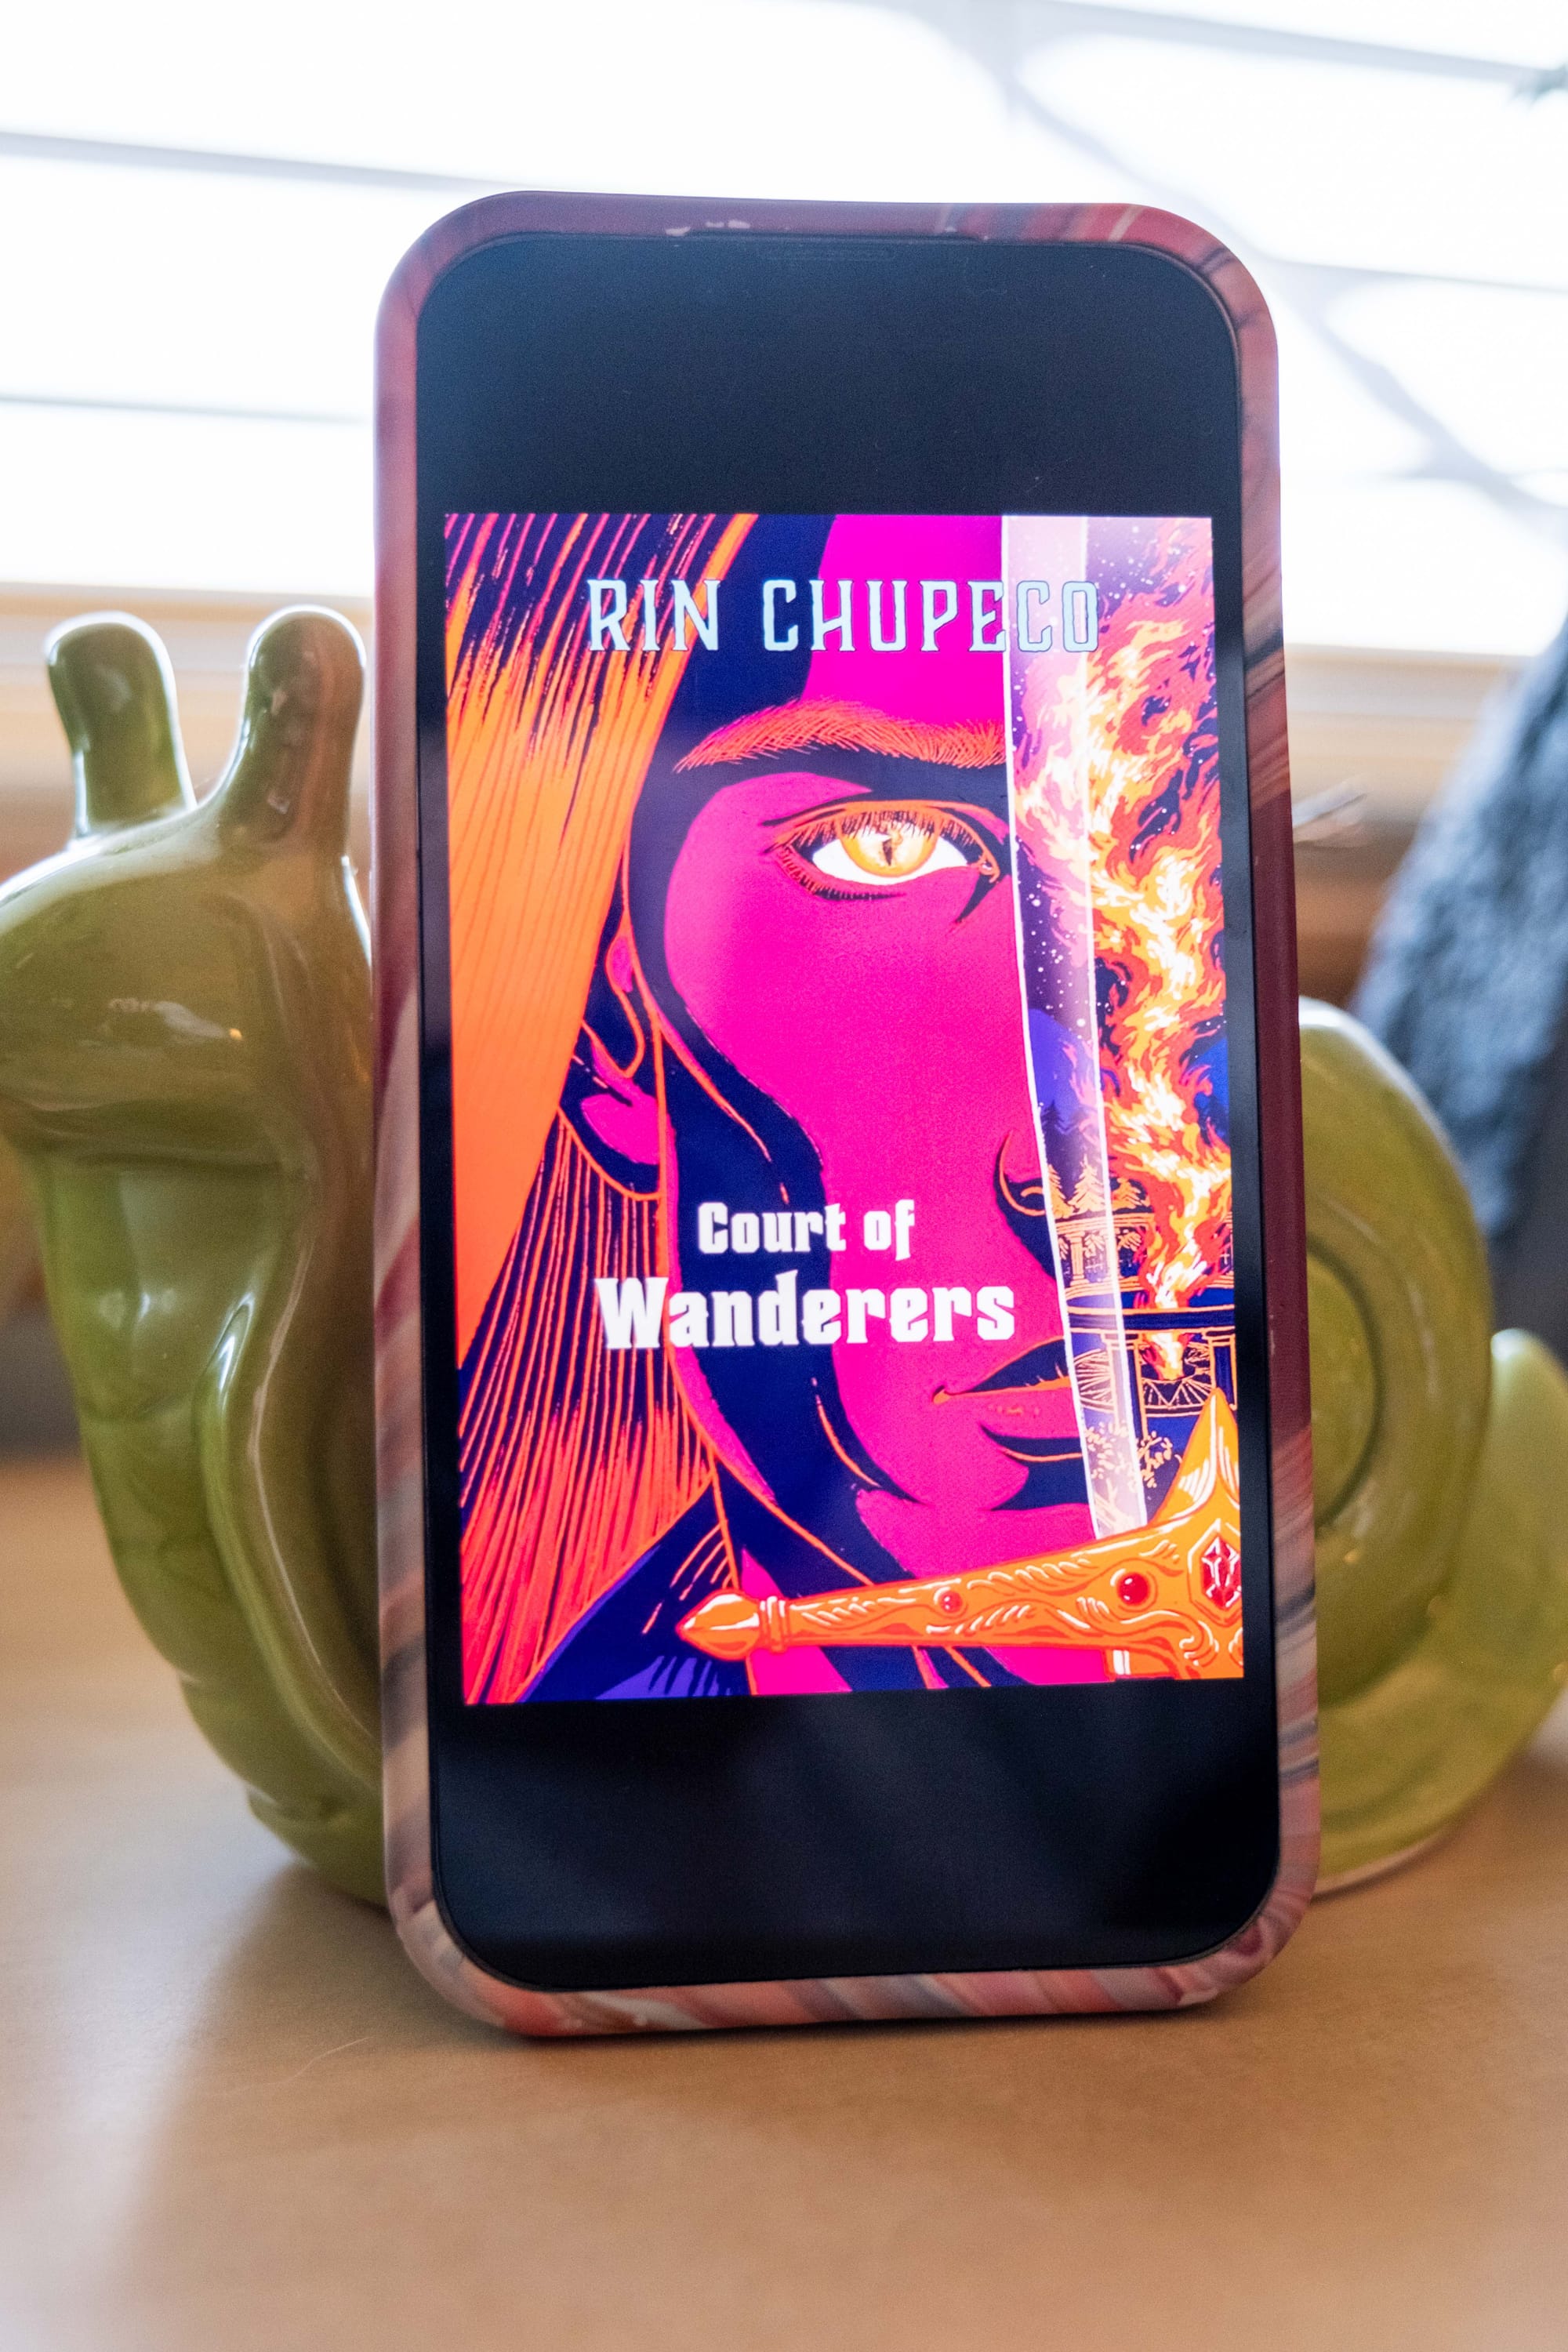 Book cover for Court of Wanderers by Rin Chupeco on an iPhone